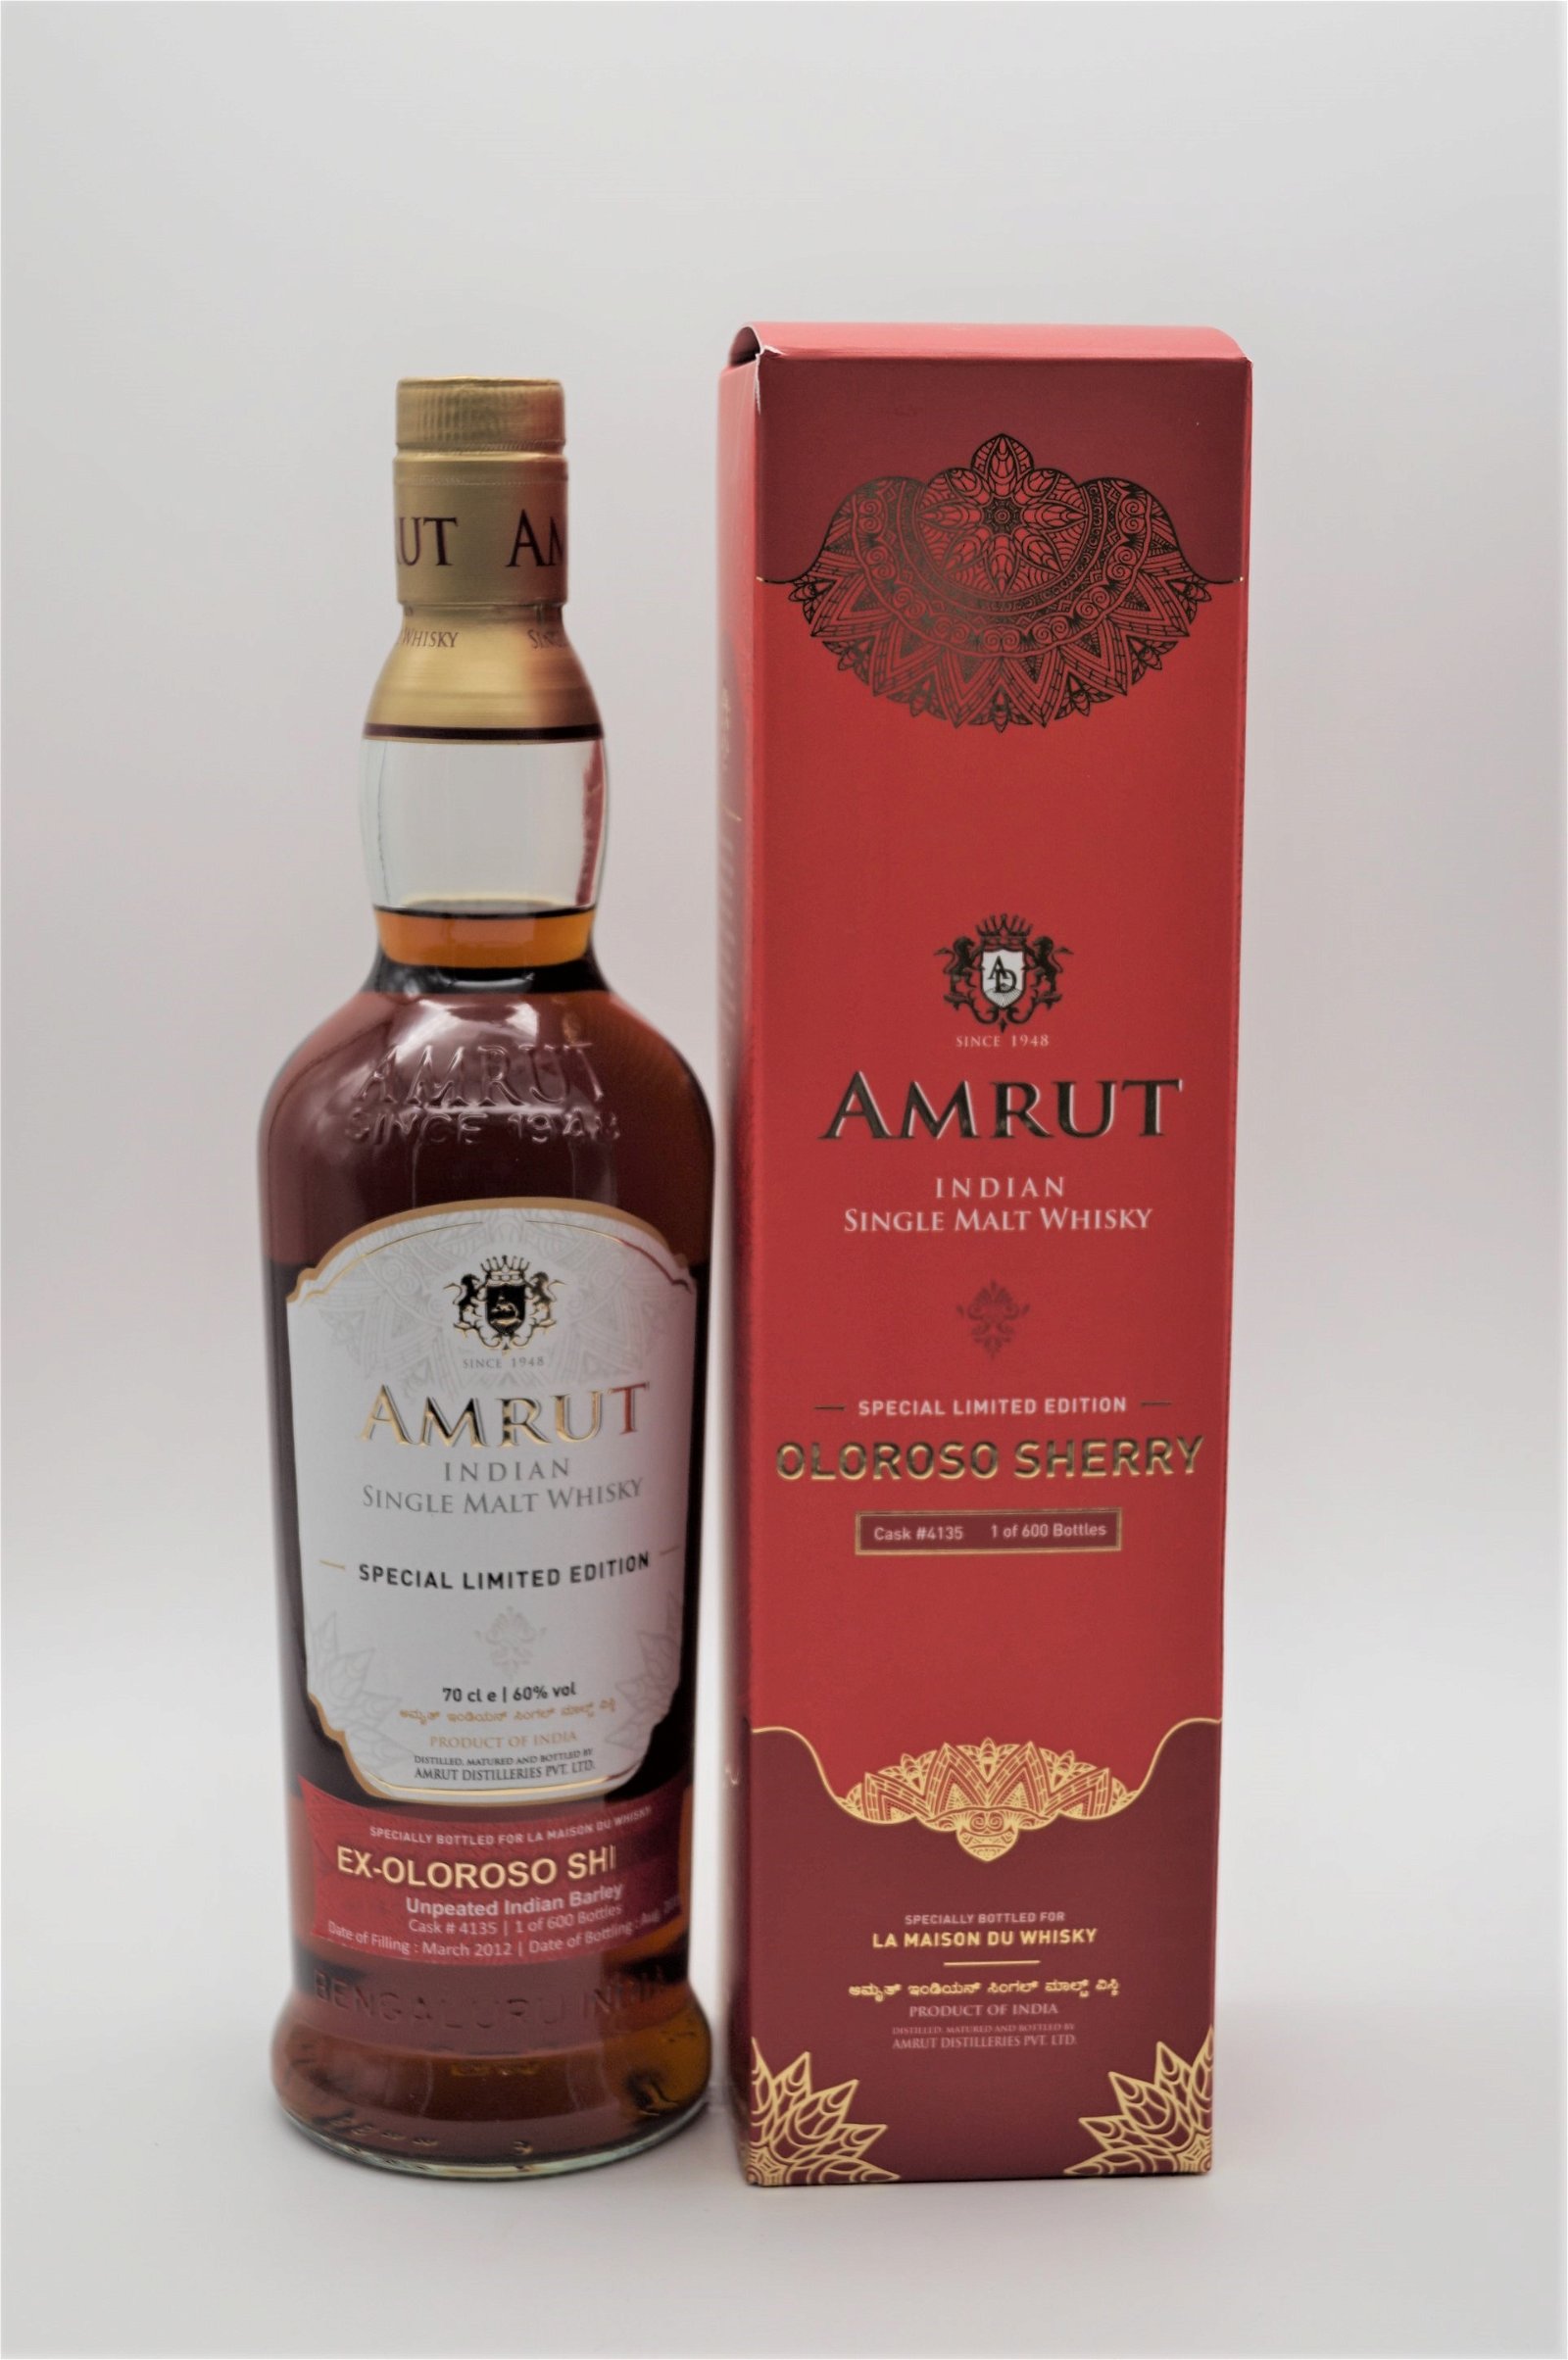 Amrut Indian Single Malt Whisky Special Limited Edition 7 Jahre